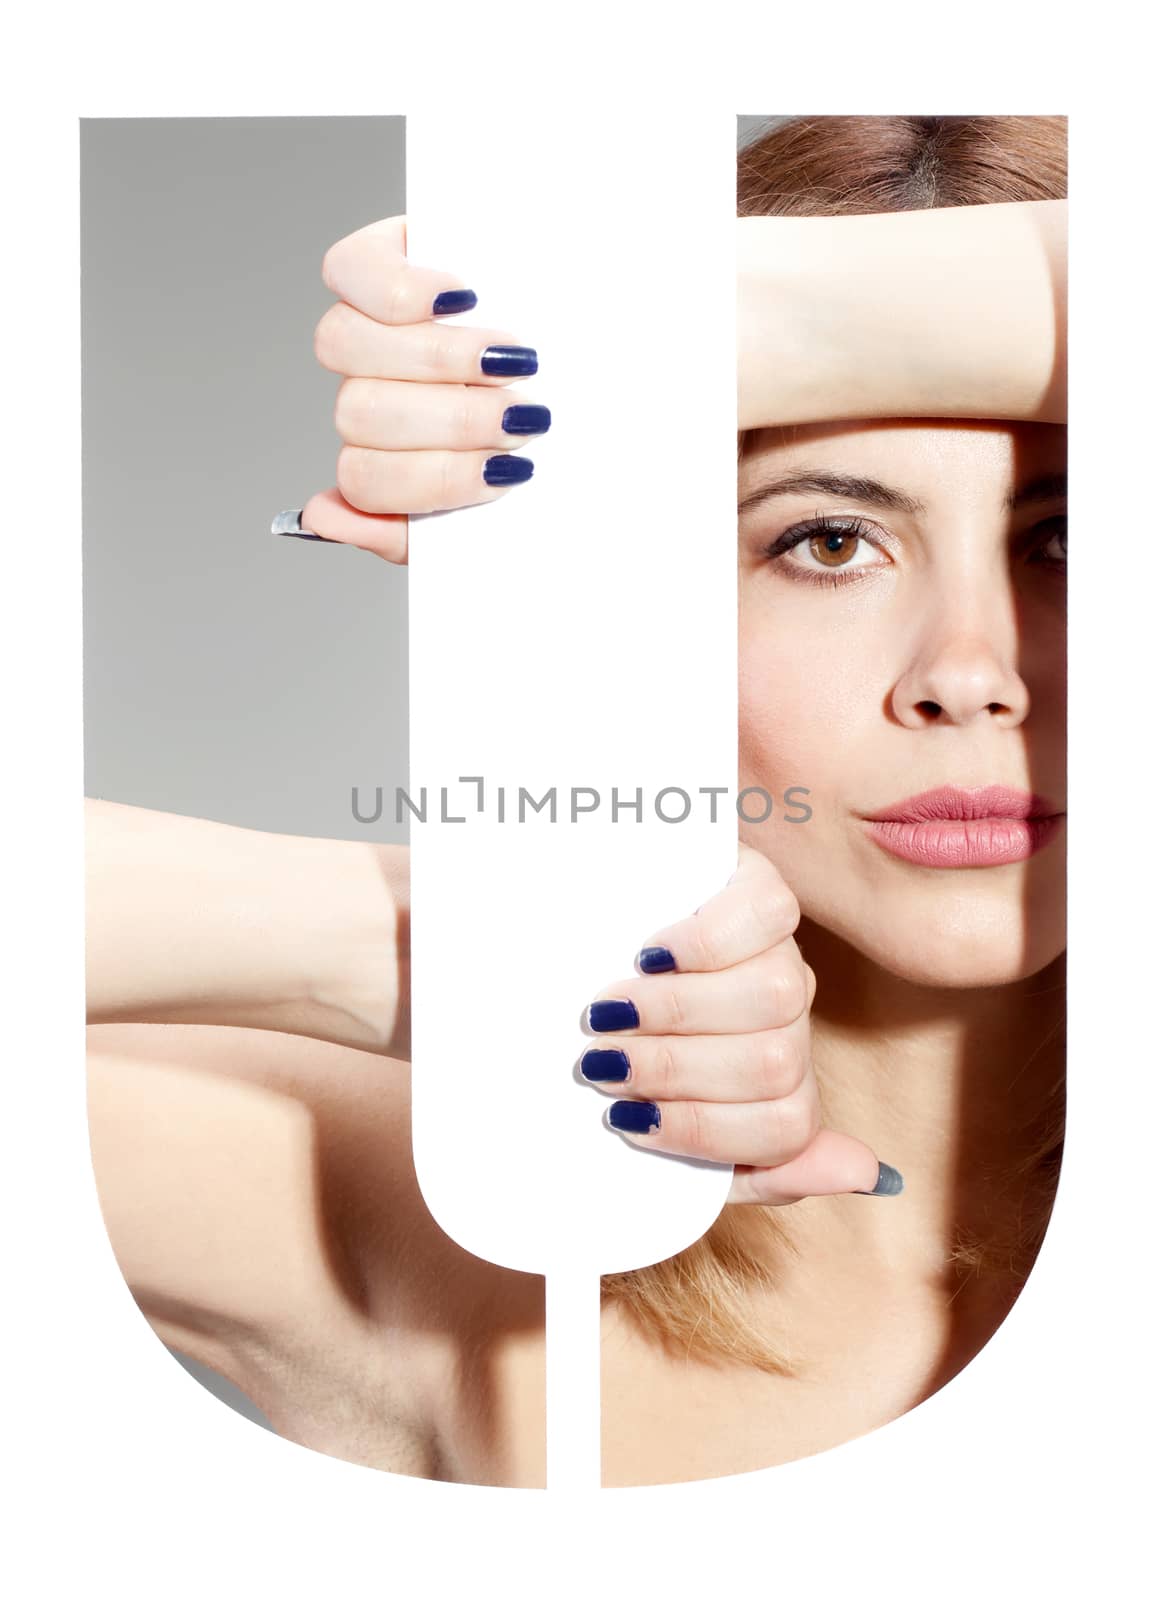 girl hiding behind and holding the letter "U"